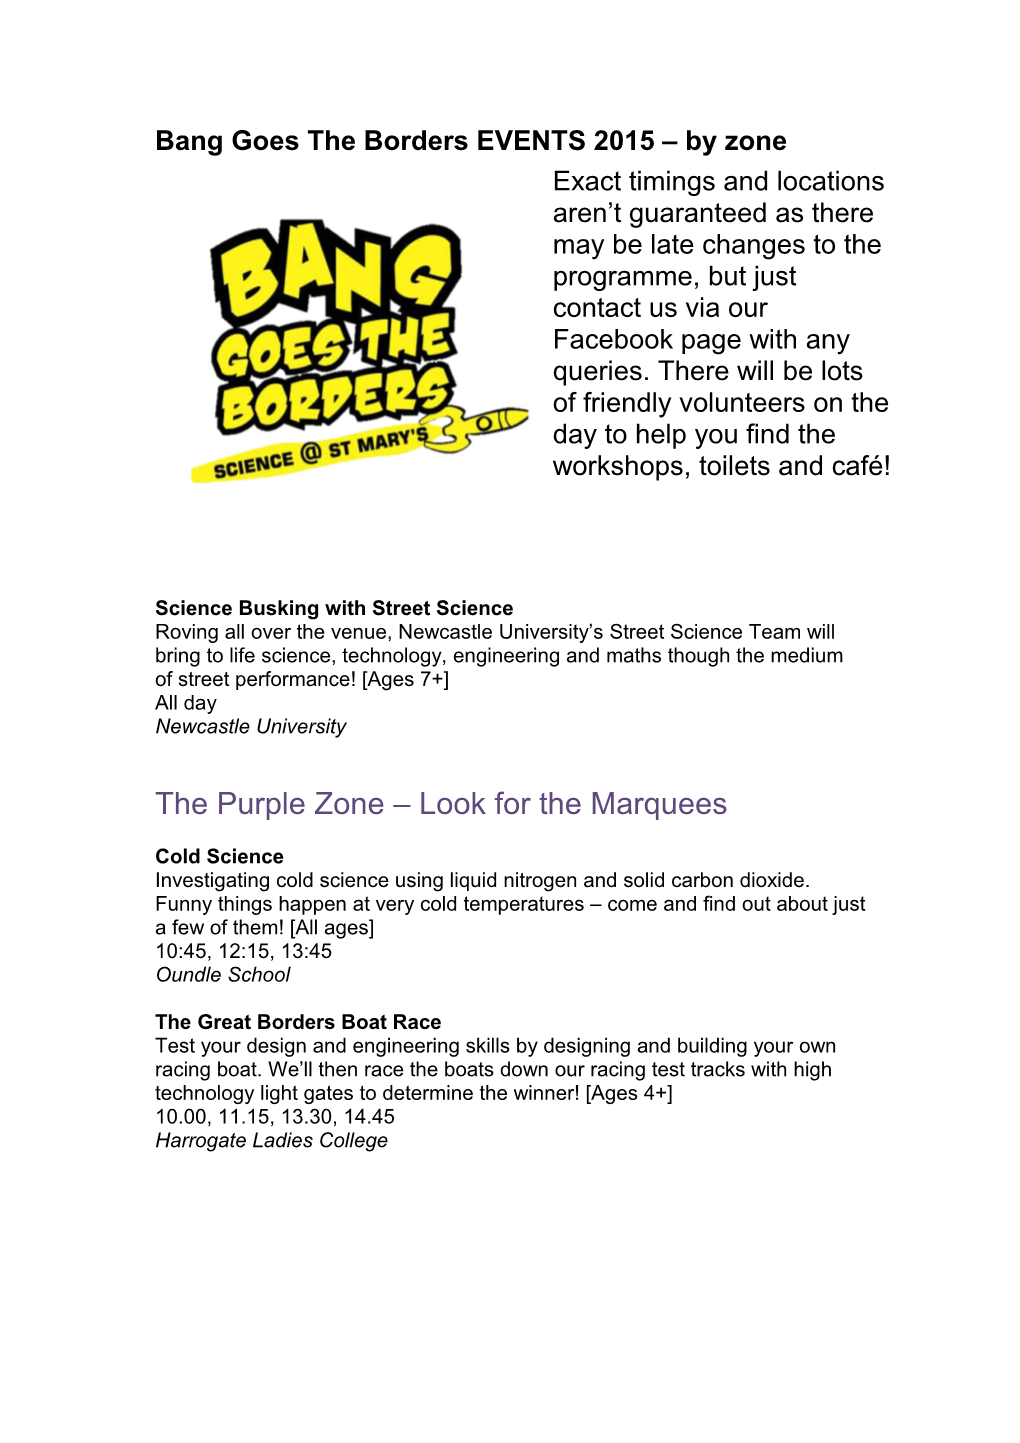 Bang Goes the Borders EVENTS 2015 by Zone